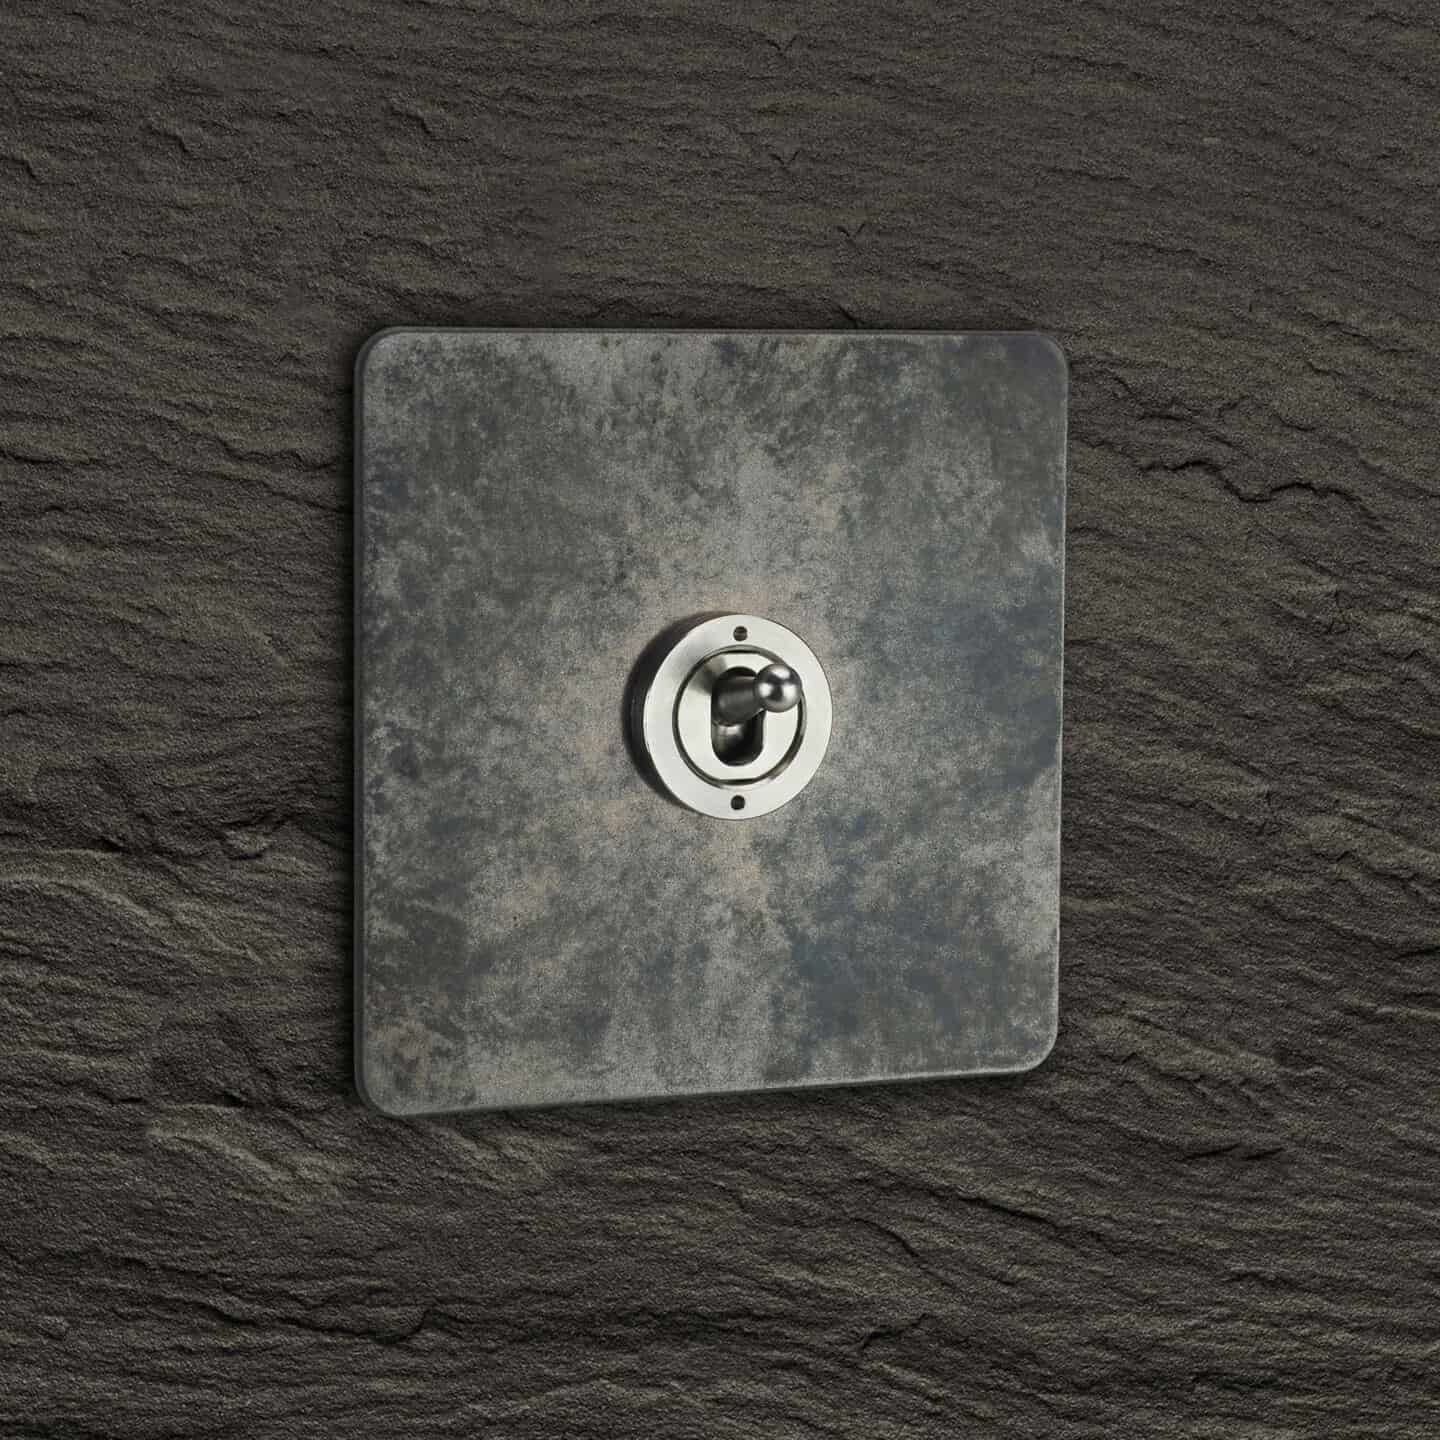 Focus SB nature-inspired light switch in antique nickel silver